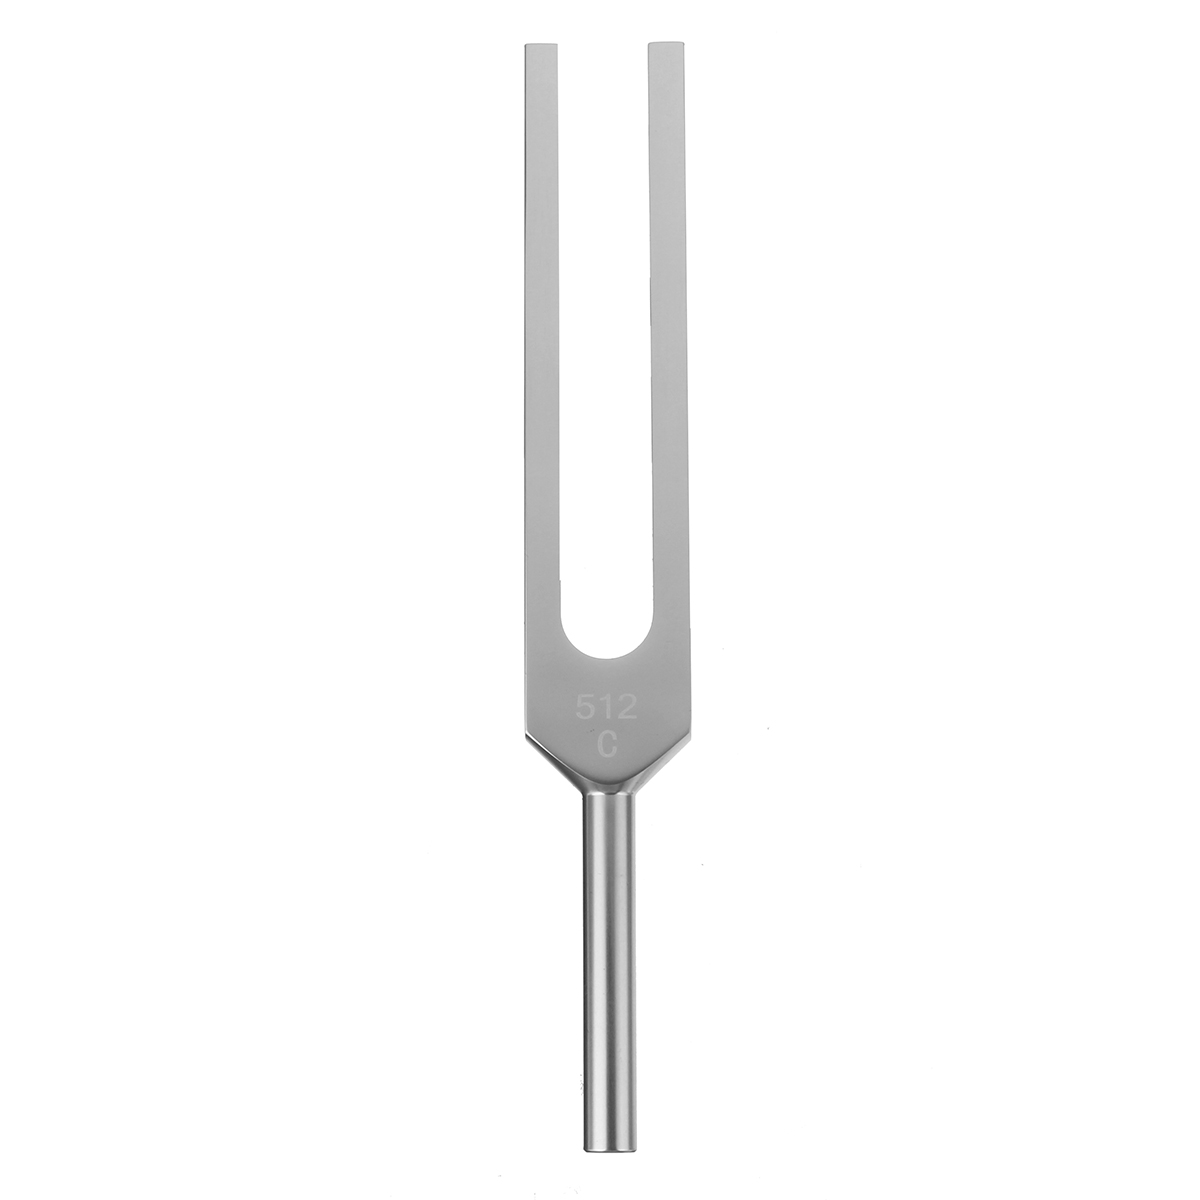 512HZ-Tuning-Fork-Surgical-Diagnostic-Medical-Instrument-Physical-Chakra-Hammer-1437018-4